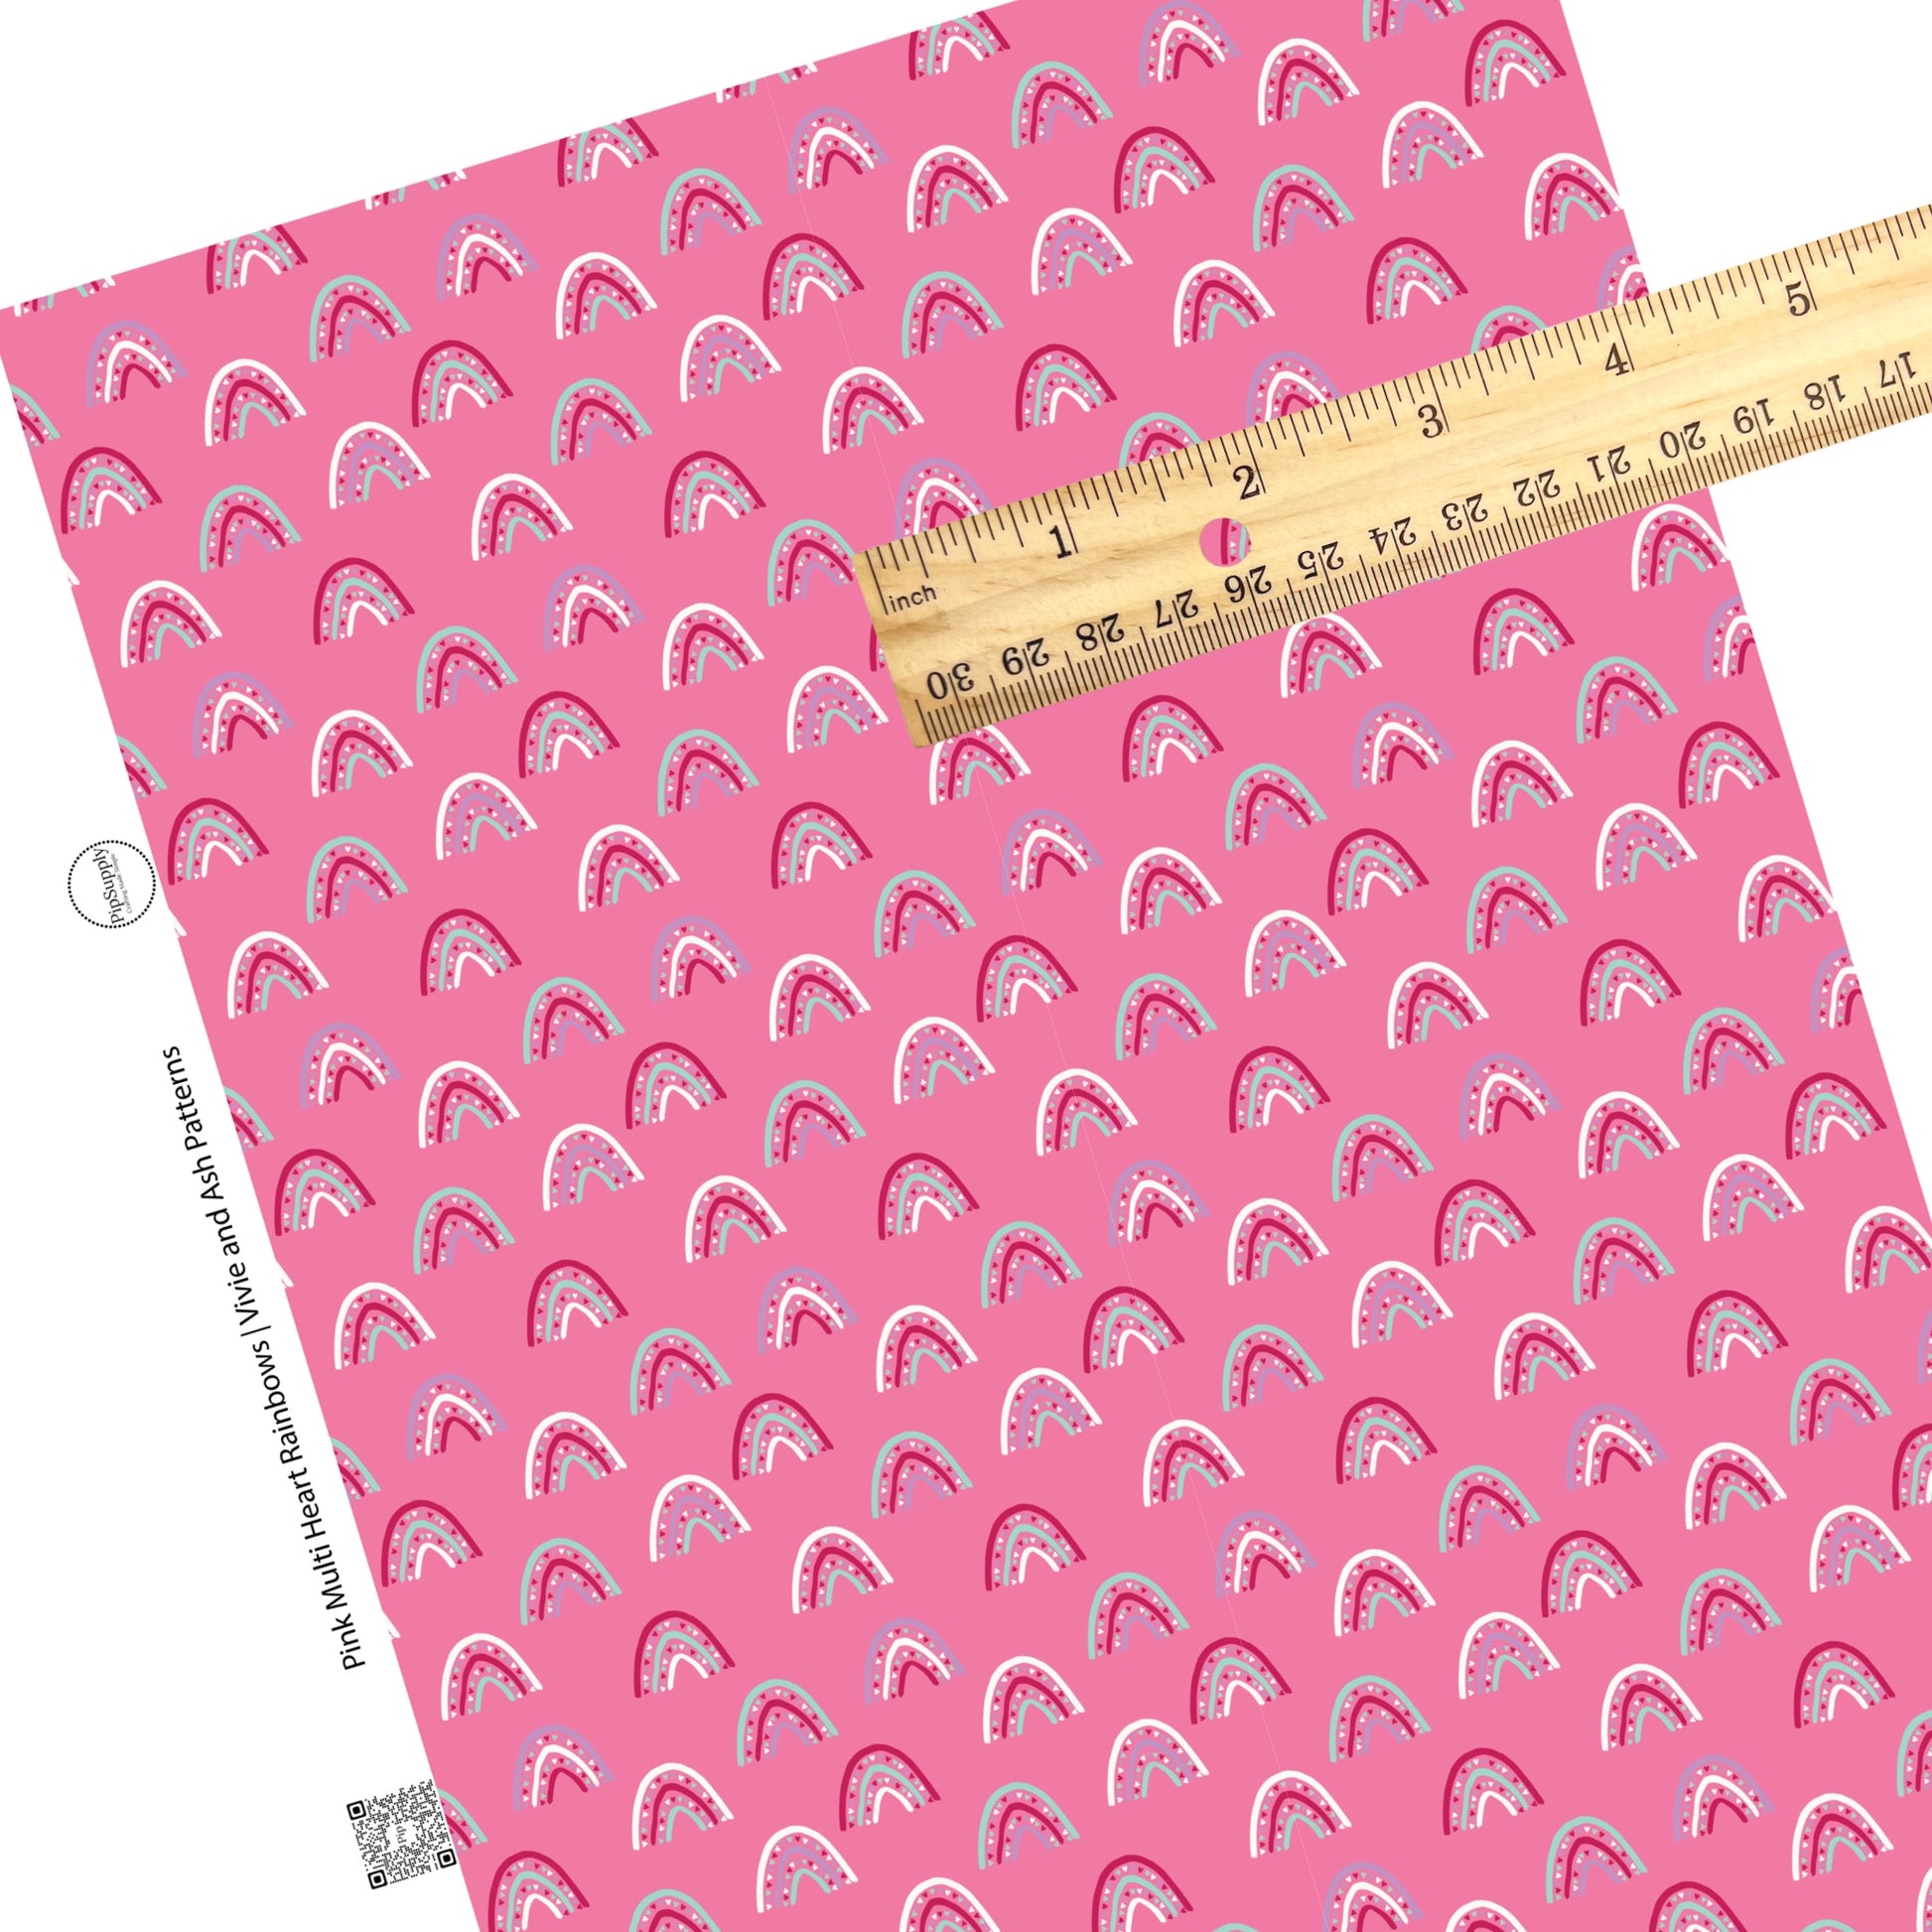 These Valentine's pattern themed faux leather sheets contain the following design elements: multi colored rainbows on pink. Our CPSIA compliant faux leather sheets or rolls can be used for all types of crafting projects.